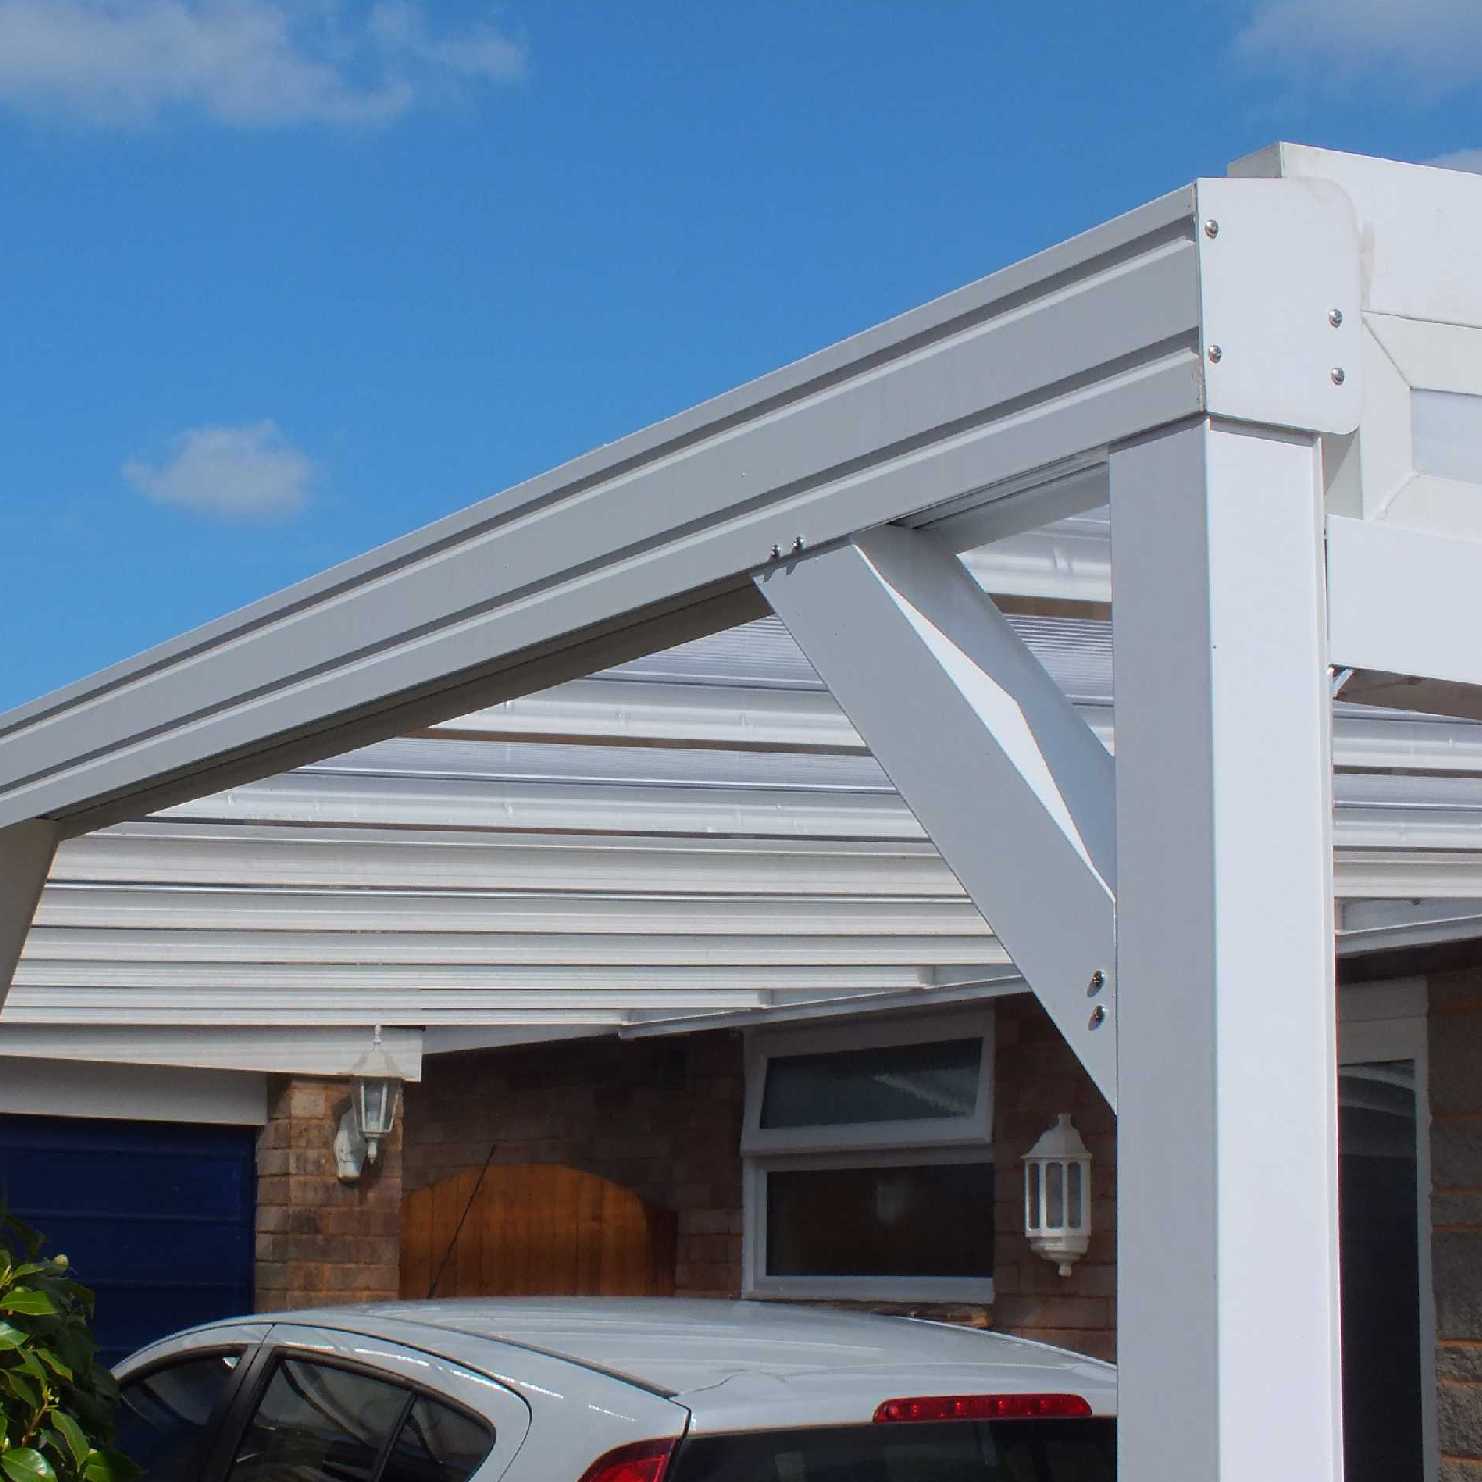 Buy Omega Smart Lean-To Canopy, White with 16mm Polycarbonate Glazing - 3.5m (W) x 4.5m (P), (3) Supporting Posts online today